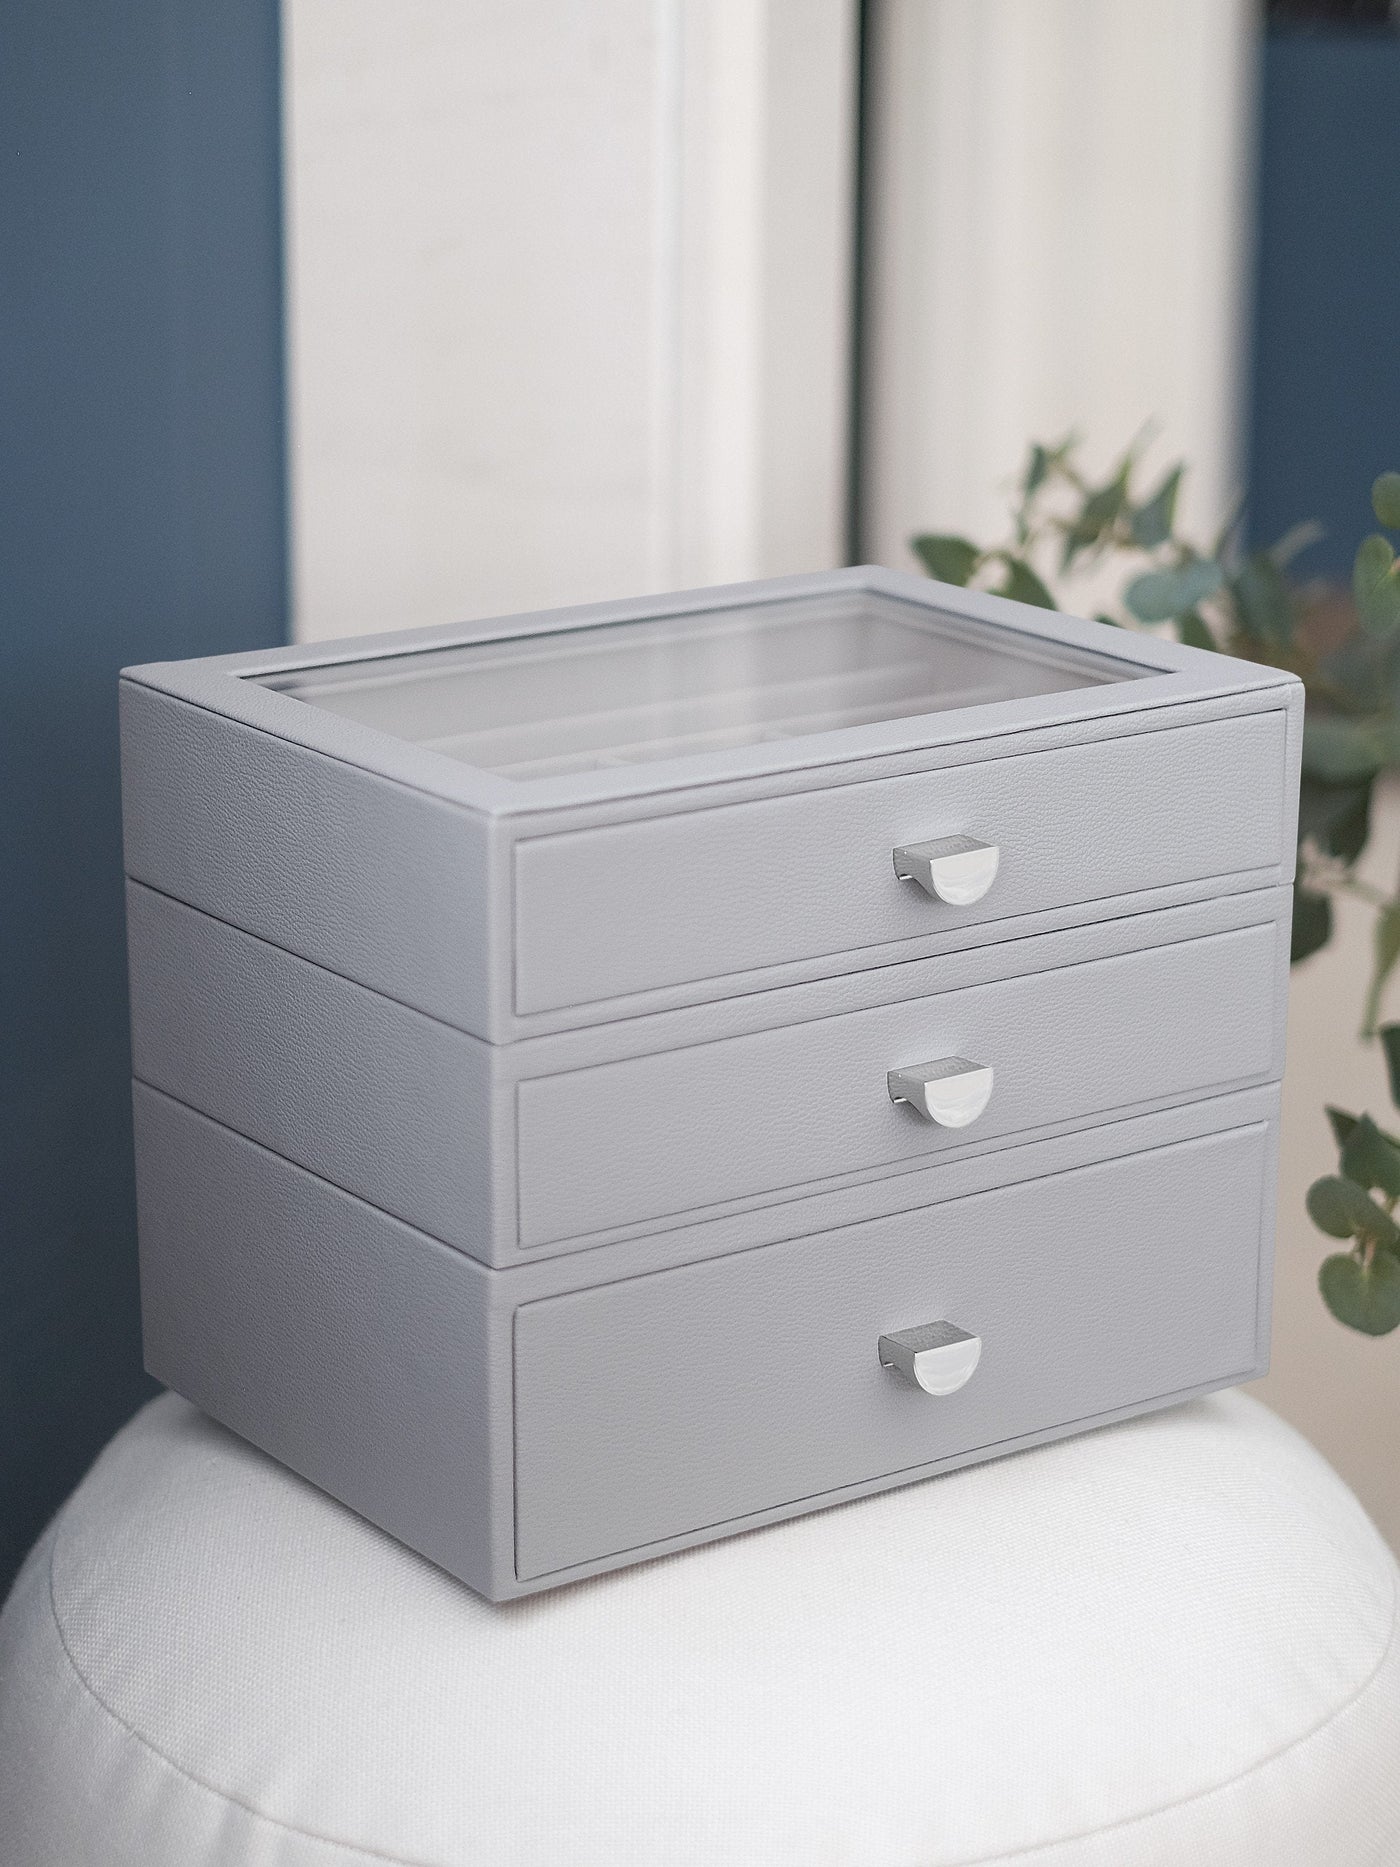 Stackers. Pebble Grey Classic Jewellery Box - Set of 3 (with drawers) - timeframedclocks